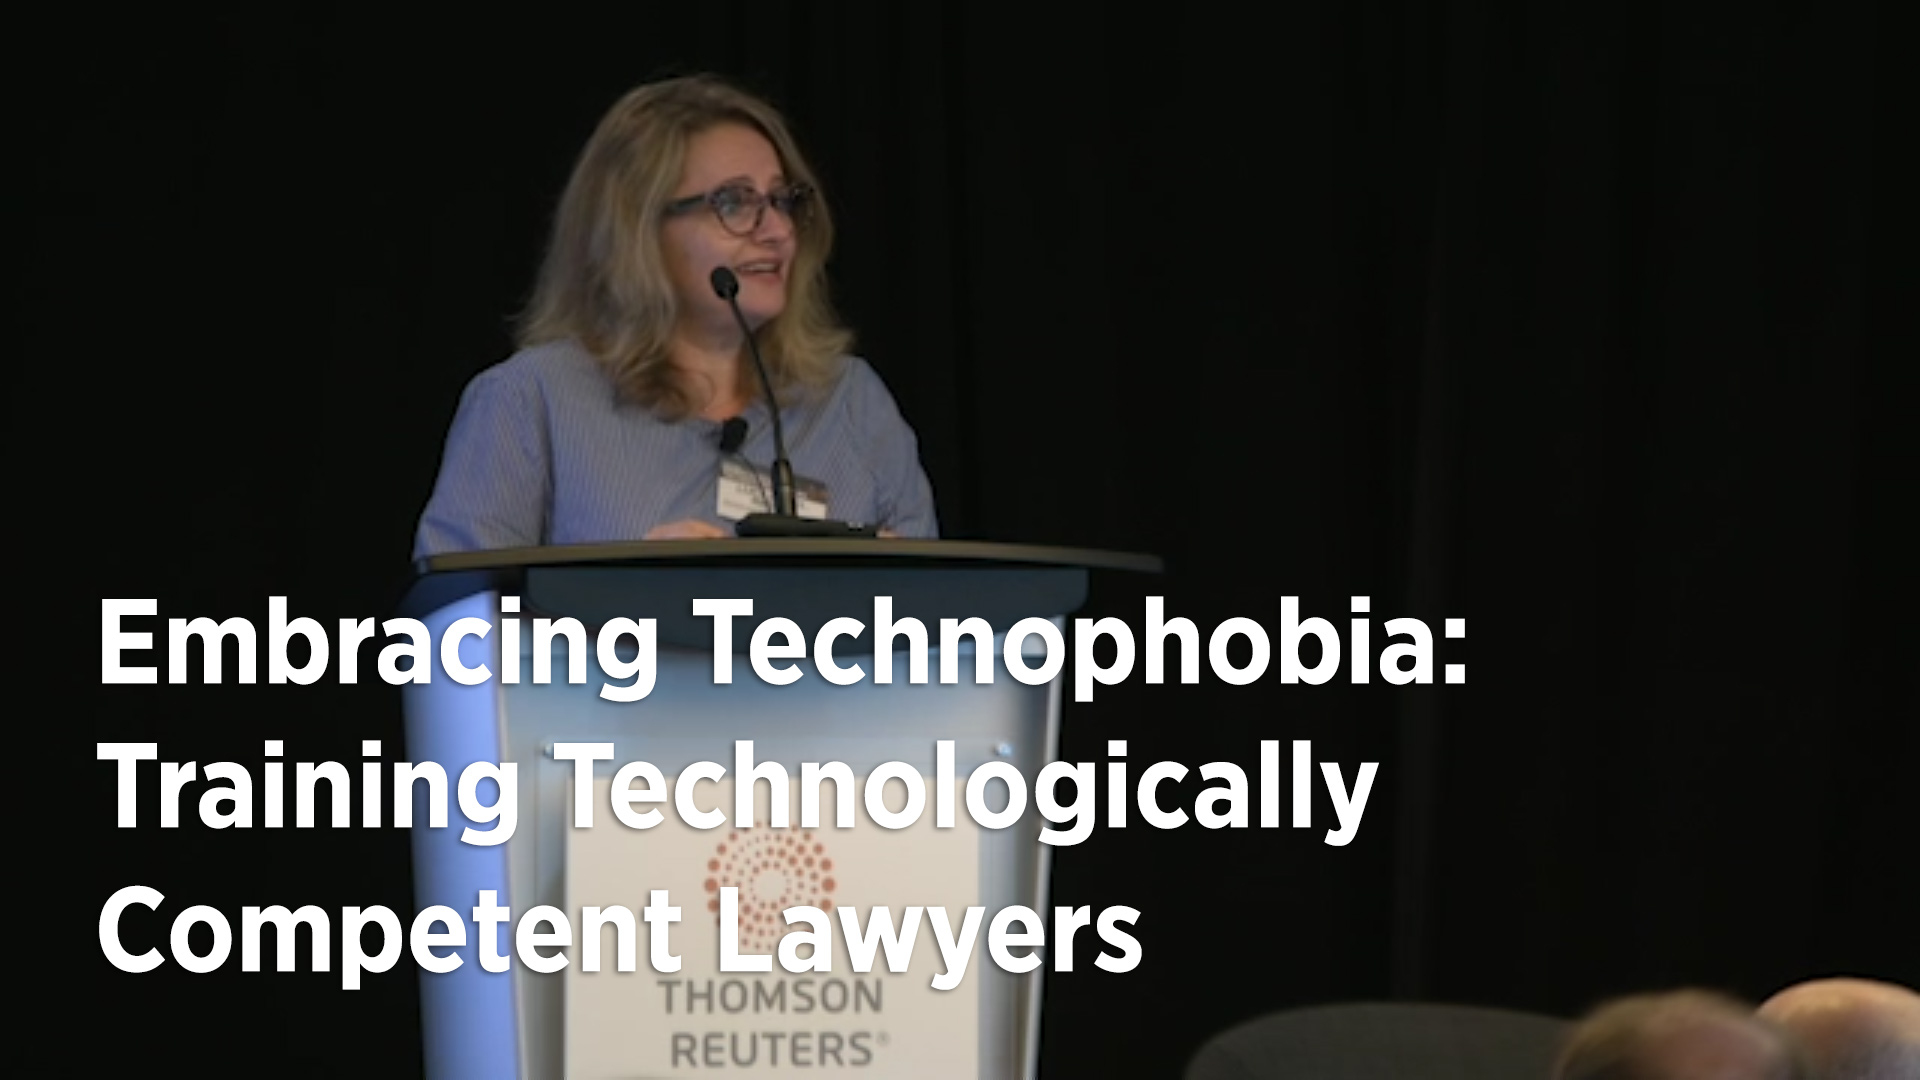 Embracing Technophobia: Training Technologically Competent Lawyers